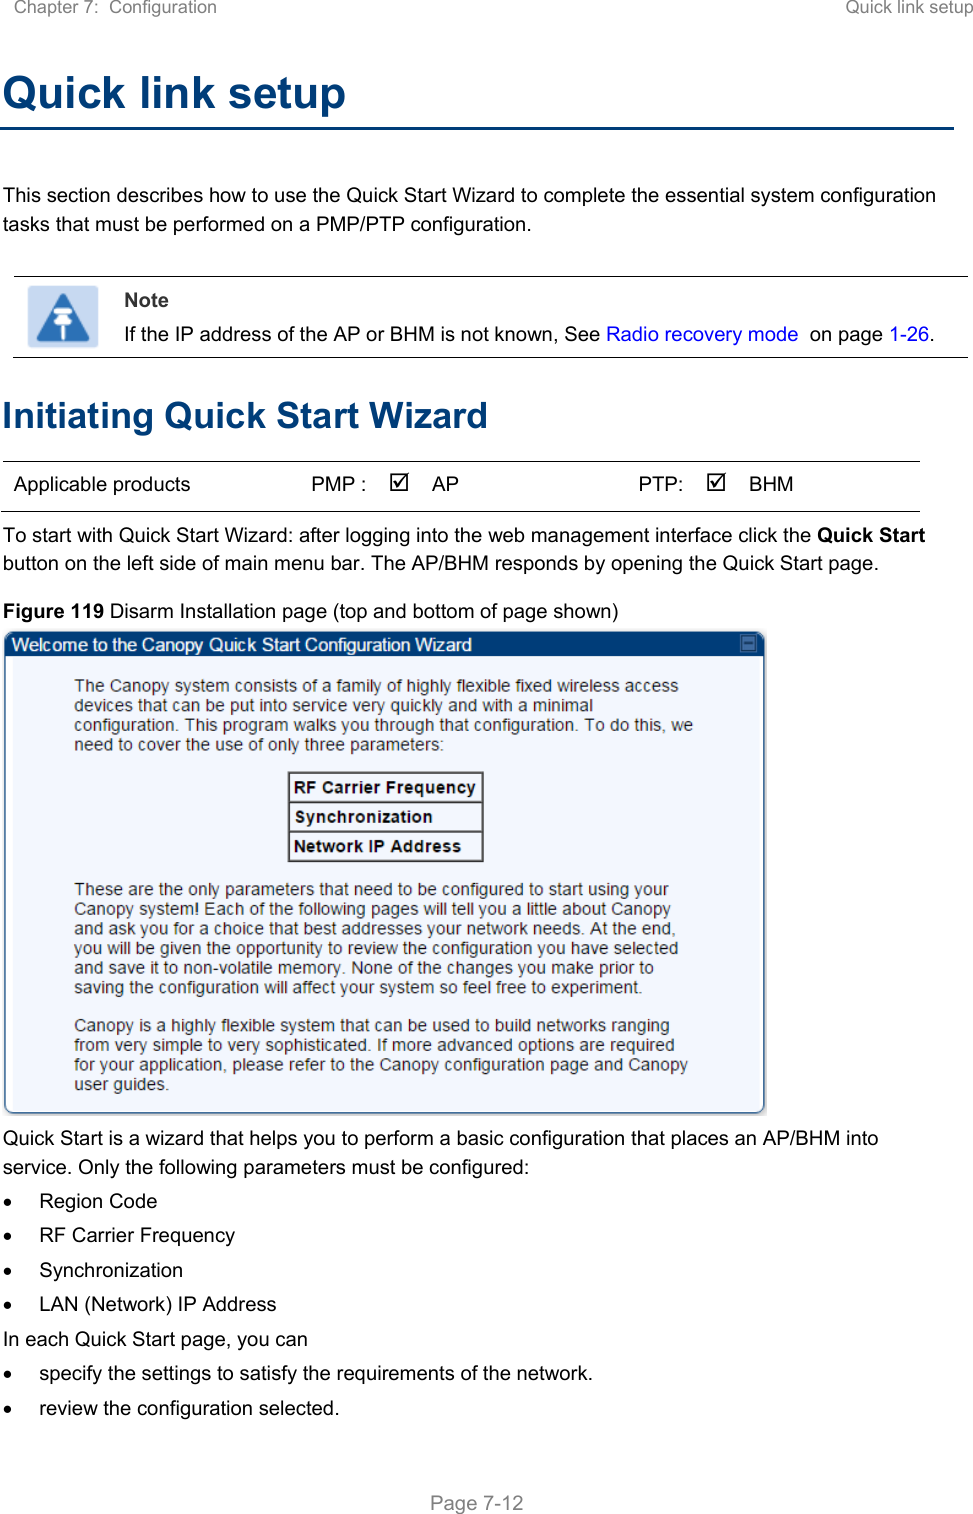 Chapter 7:  Configuration  Quick link setup   Page 7-12 Quick link setup This section describes how to use the Quick Start Wizard to complete the essential system configuration tasks that must be performed on a PMP/PTP configuration.   Note If the IP address of the AP or BHM is not known, See Radio recovery mode  on page 1-26. Initiating Quick Start Wizard Applicable products  PMP :  AP    PTP:BHM    To start with Quick Start Wizard: after logging into the web management interface click the Quick Start button on the left side of main menu bar. The AP/BHM responds by opening the Quick Start page. Figure 119 Disarm Installation page (top and bottom of page shown)  Quick Start is a wizard that helps you to perform a basic configuration that places an AP/BHM into service. Only the following parameters must be configured:   Region Code   RF Carrier Frequency   Synchronization   LAN (Network) IP Address In each Quick Start page, you can   specify the settings to satisfy the requirements of the network.   review the configuration selected. 